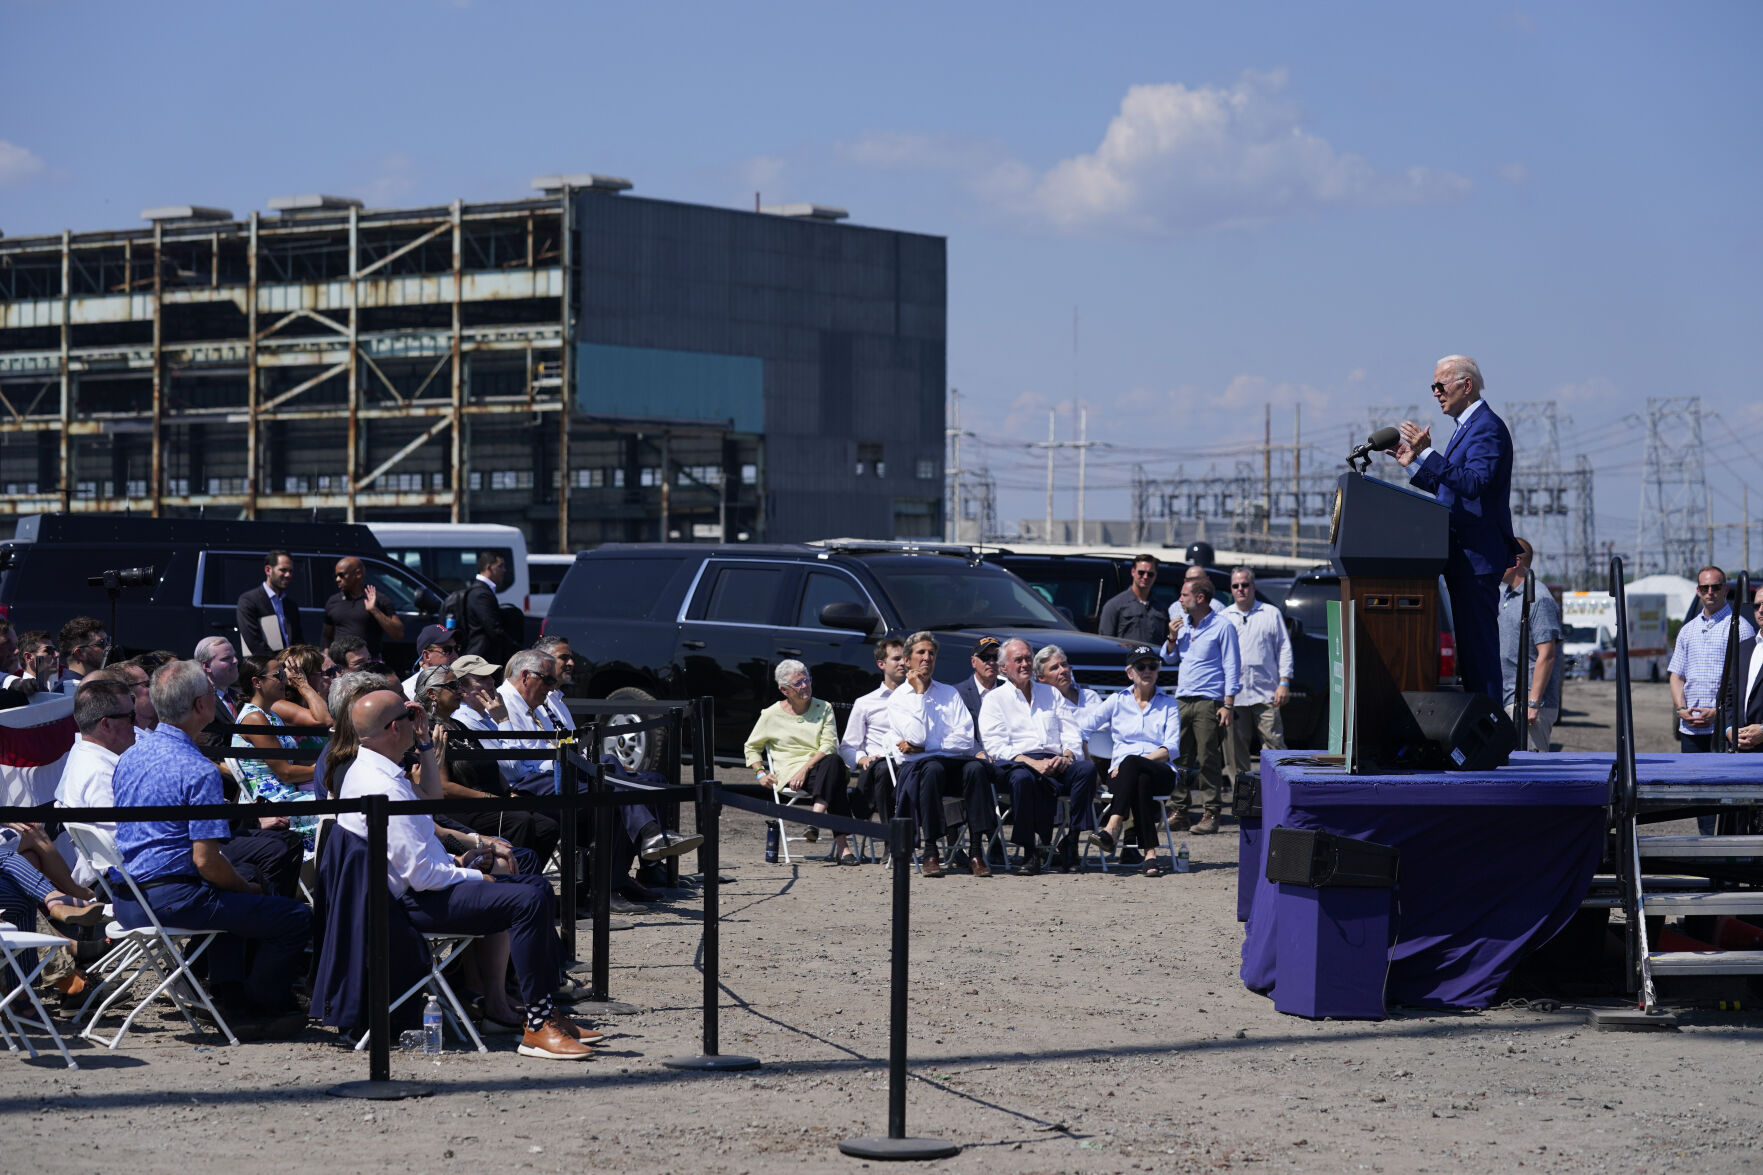 <p>FILE - President Joe Biden speaks about climate change and clean energy at Brayton Power Station, July 20, 2022, in Somerset, Mass. The Biden administration is making $450 million available for solar farms and other clean energy projects across the country at the site of current or former coal mines. (AP Photo/Evan Vucci)</p>   PHOTO CREDIT: Evan Vucci 